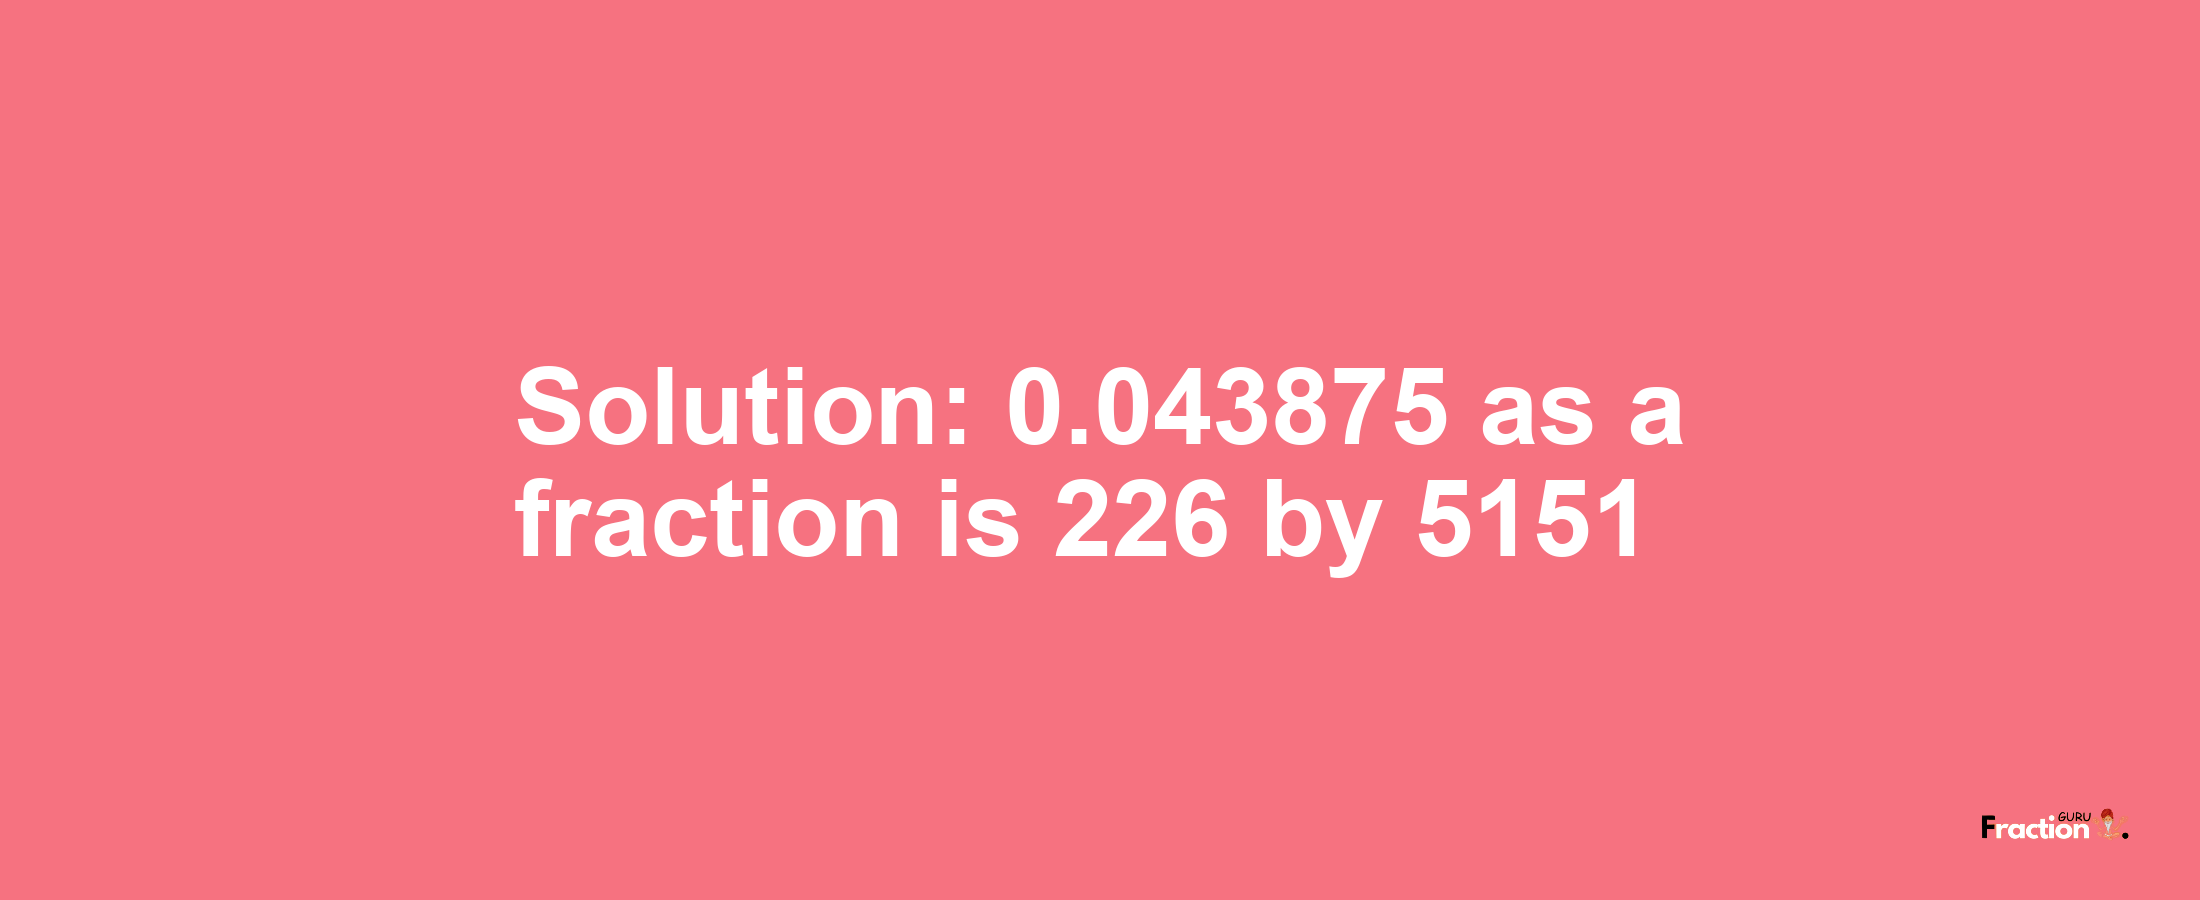 Solution:0.043875 as a fraction is 226/5151